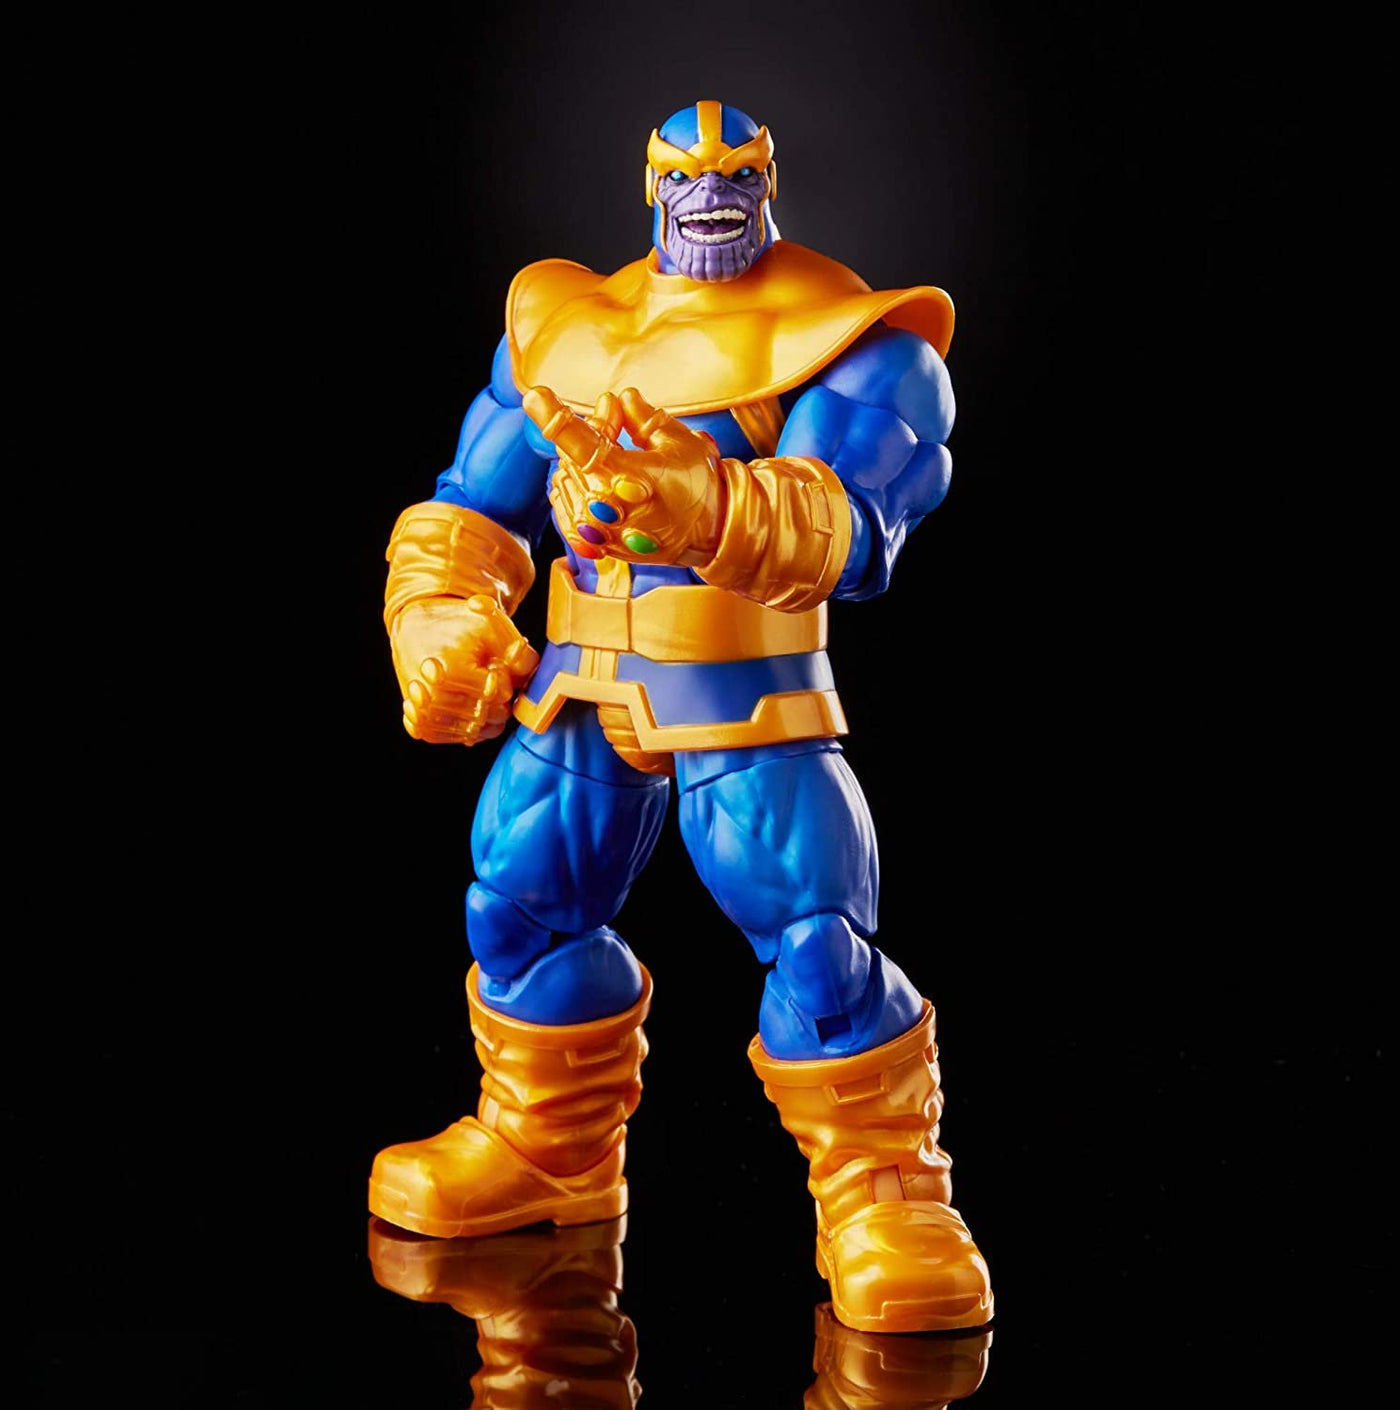 Marvel Hasbro Legends Series 6-inch Collectible Action Figure Thanos Toy, Premium Design and 3 Accessories